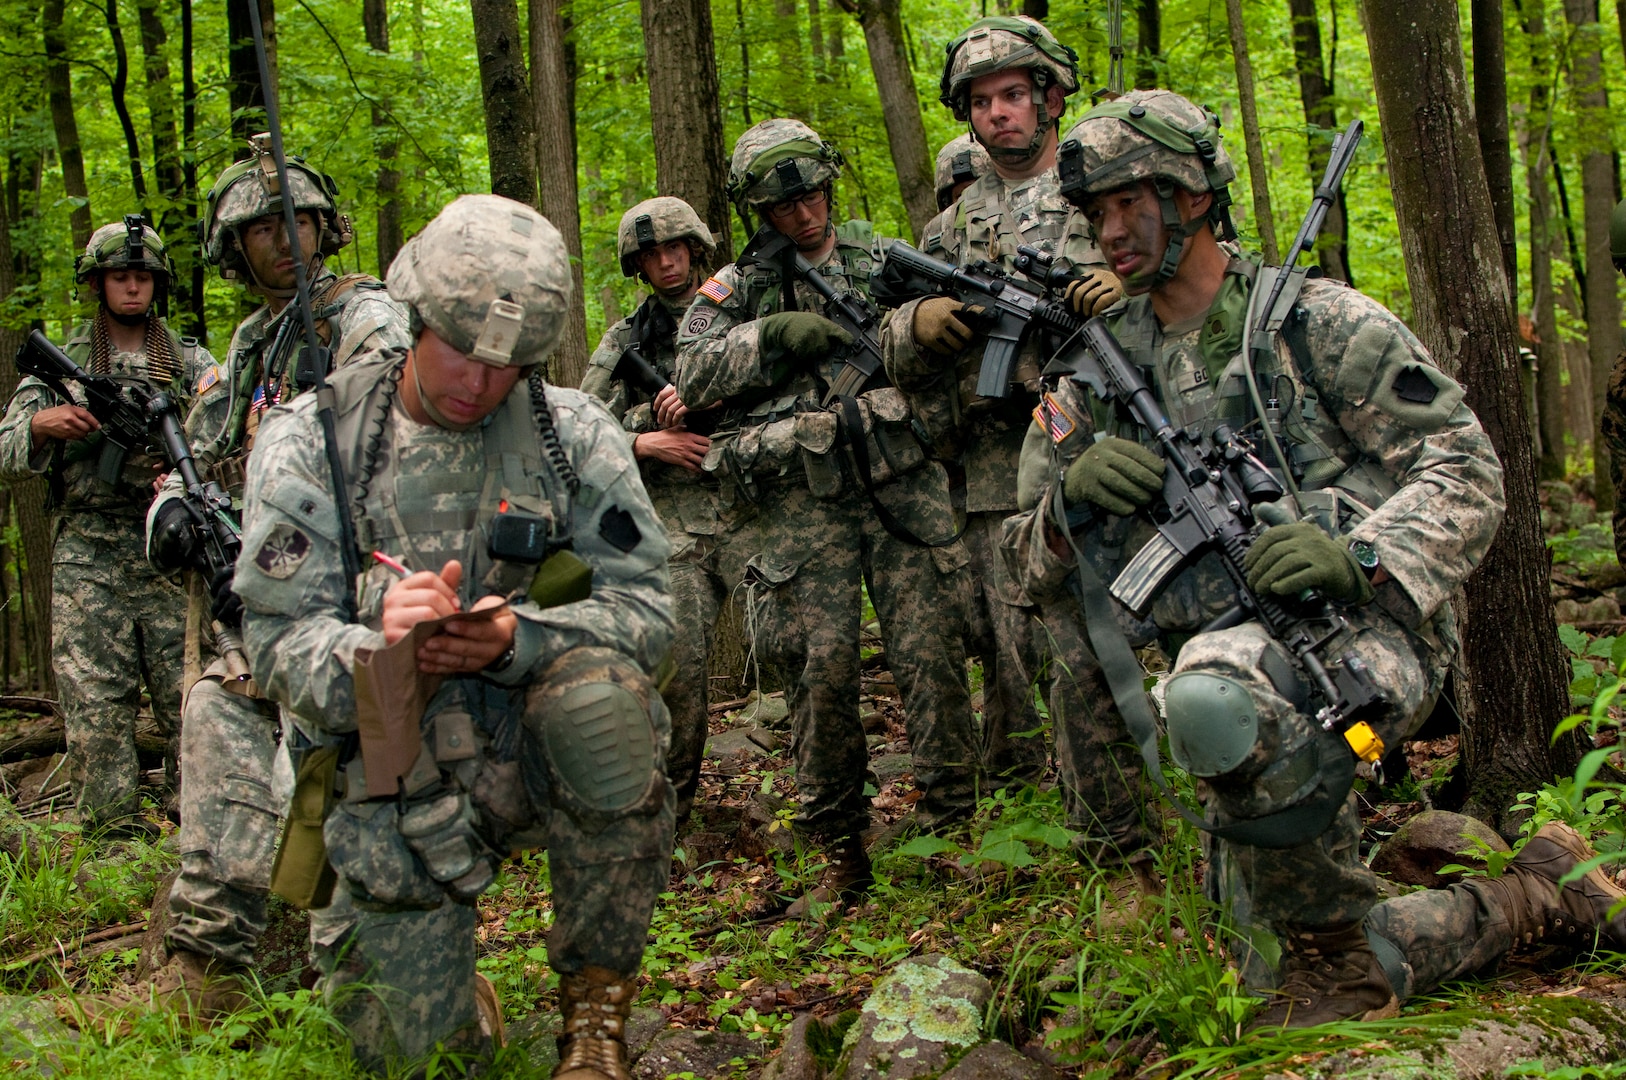 Army 2nd Lt. Abram Gordon, right, rifle platoon leader, Charlie Company, 1st Battalion, 175th Infantry Regiment, goes over his platoon movement plan during a field training exercise as part of annual training at Fort Indiantown Gap, Pa., June 9, 2014. Throughout the annual training period, Soldiers from 1st Battalion, 175th Infantry Regiment - a unit of the Maryland Army National Guard - have also worked alongside their counterparts from the Armed Forces of Bosnia-Herzegovina as part of the National Guard's State Partnership Program. The Maryland National Guard has been partnered with Bosnia-Herzegovina since 2003. 